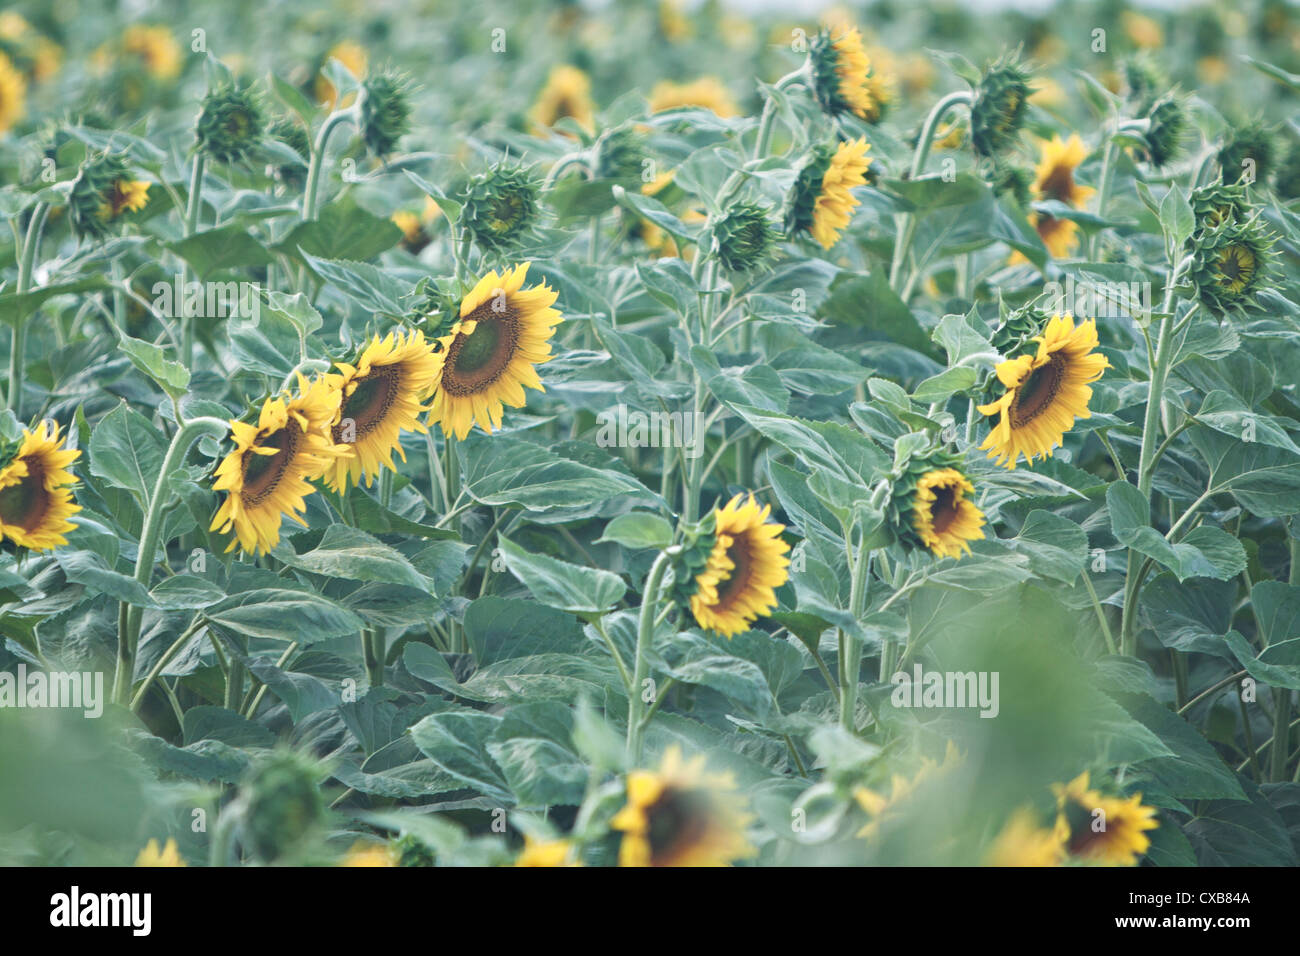 A field of Sunflowers (Helianthus annuus) Stock Photo